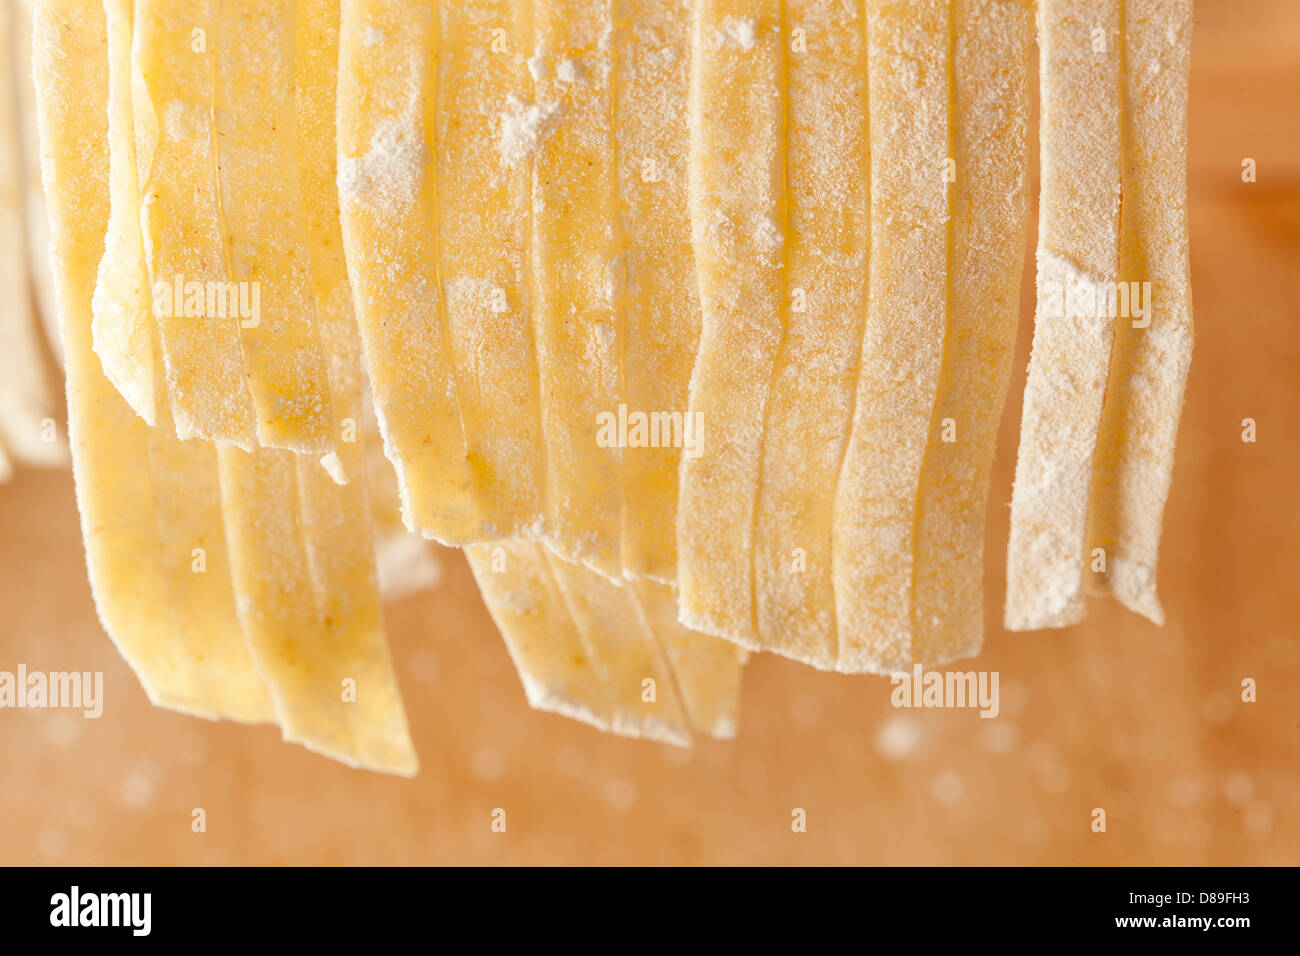 Fresh Homemade Pasta against a background Stock Photo